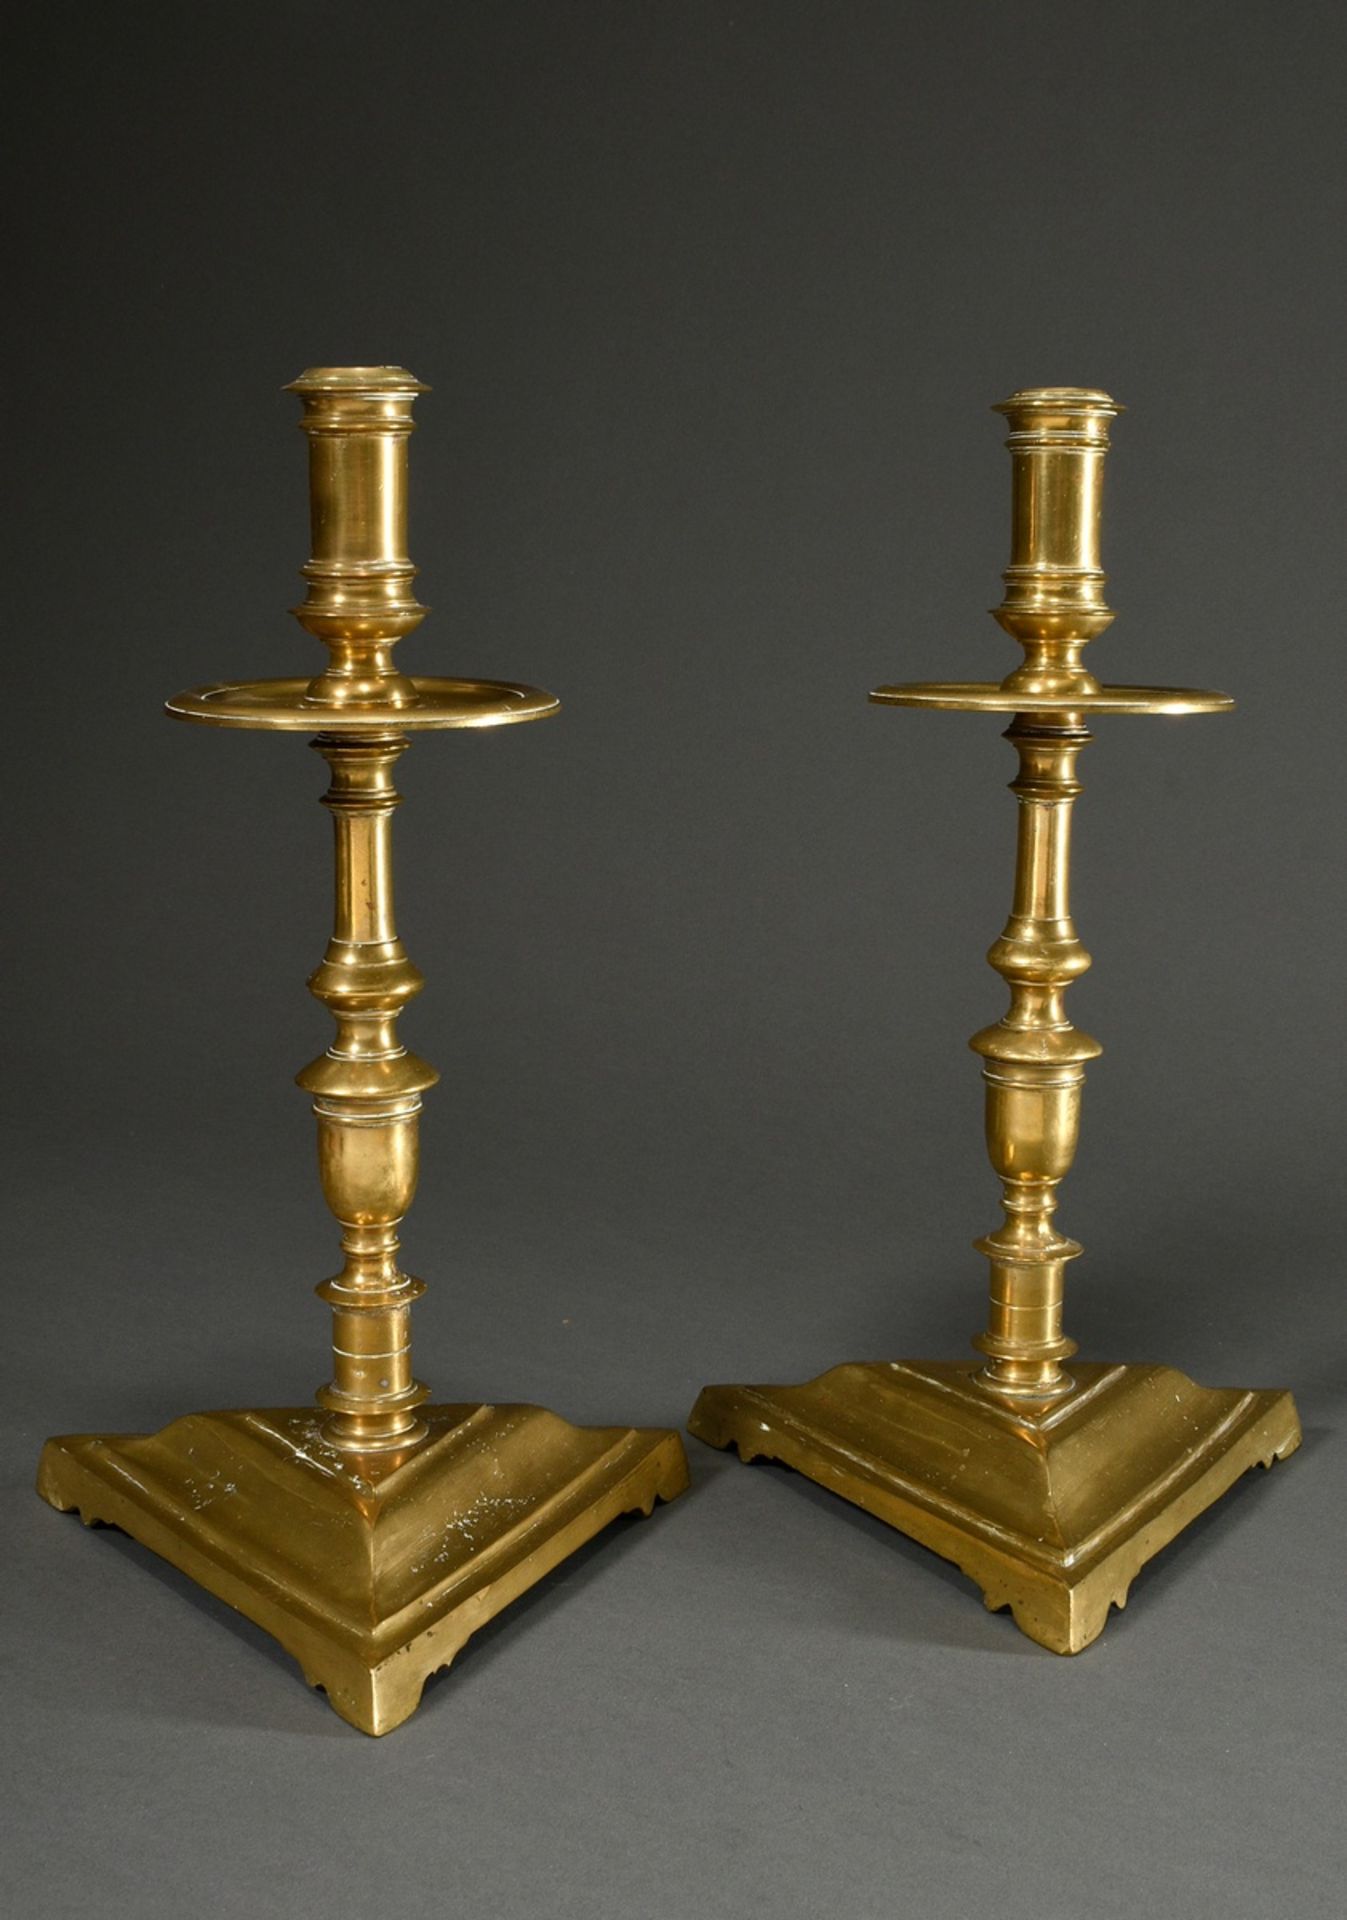 Pair of large yellow cast iron Heemskerk candlesticks with baluster stem and wide drip pans on a ra